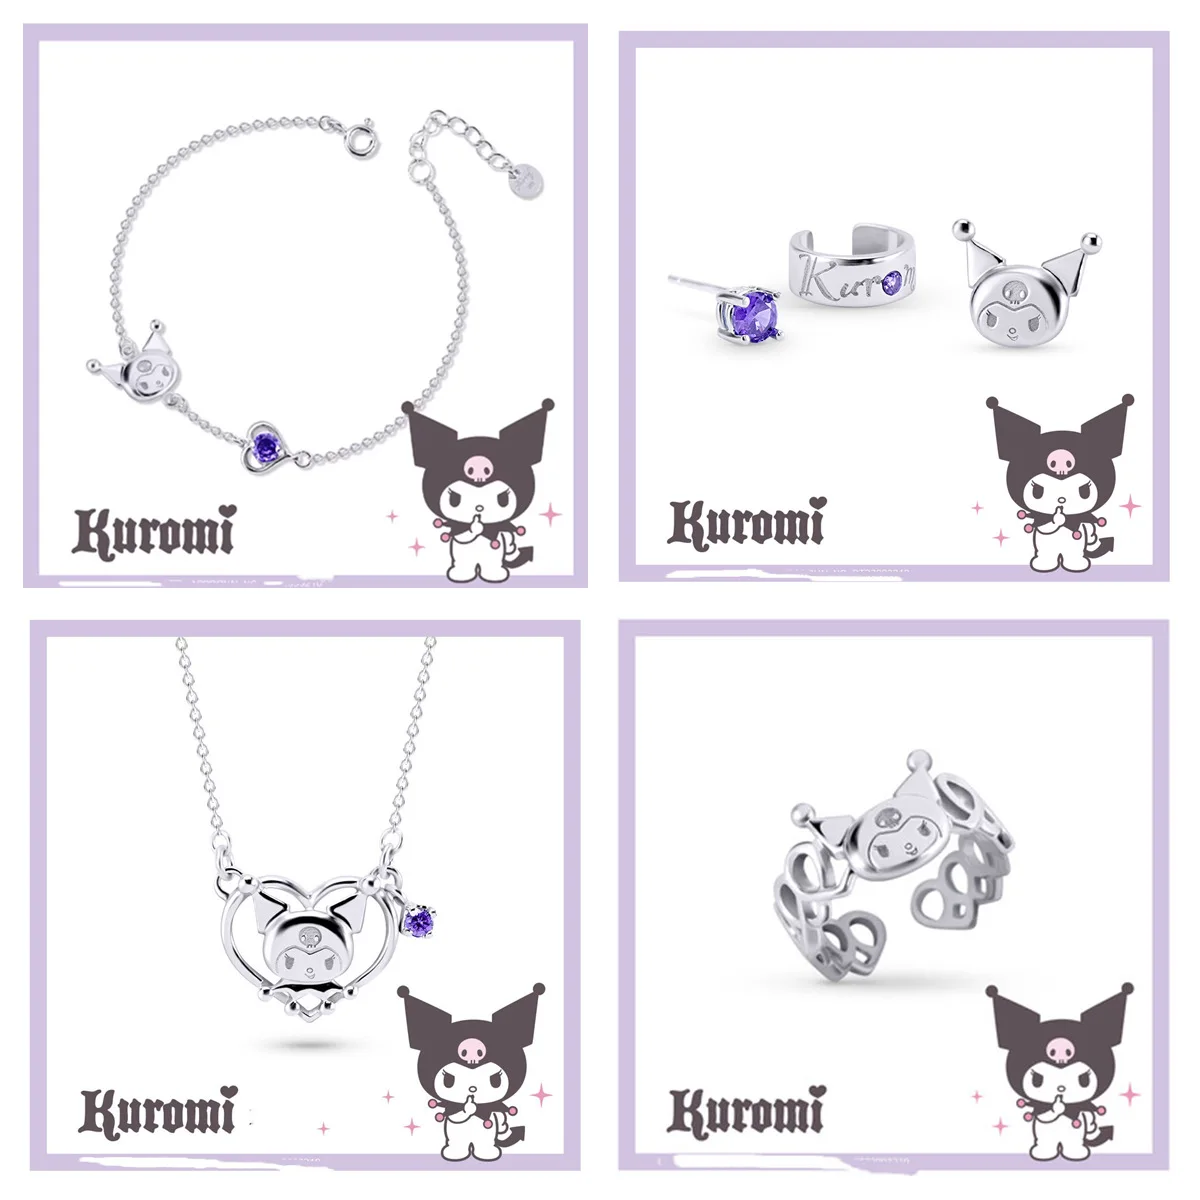 Sanrio Y2k Accessories Kuromi Necklace Bracelet Ring Earrings Set Hello Kity Necklace Kawaii Productos Cute Things For Girls